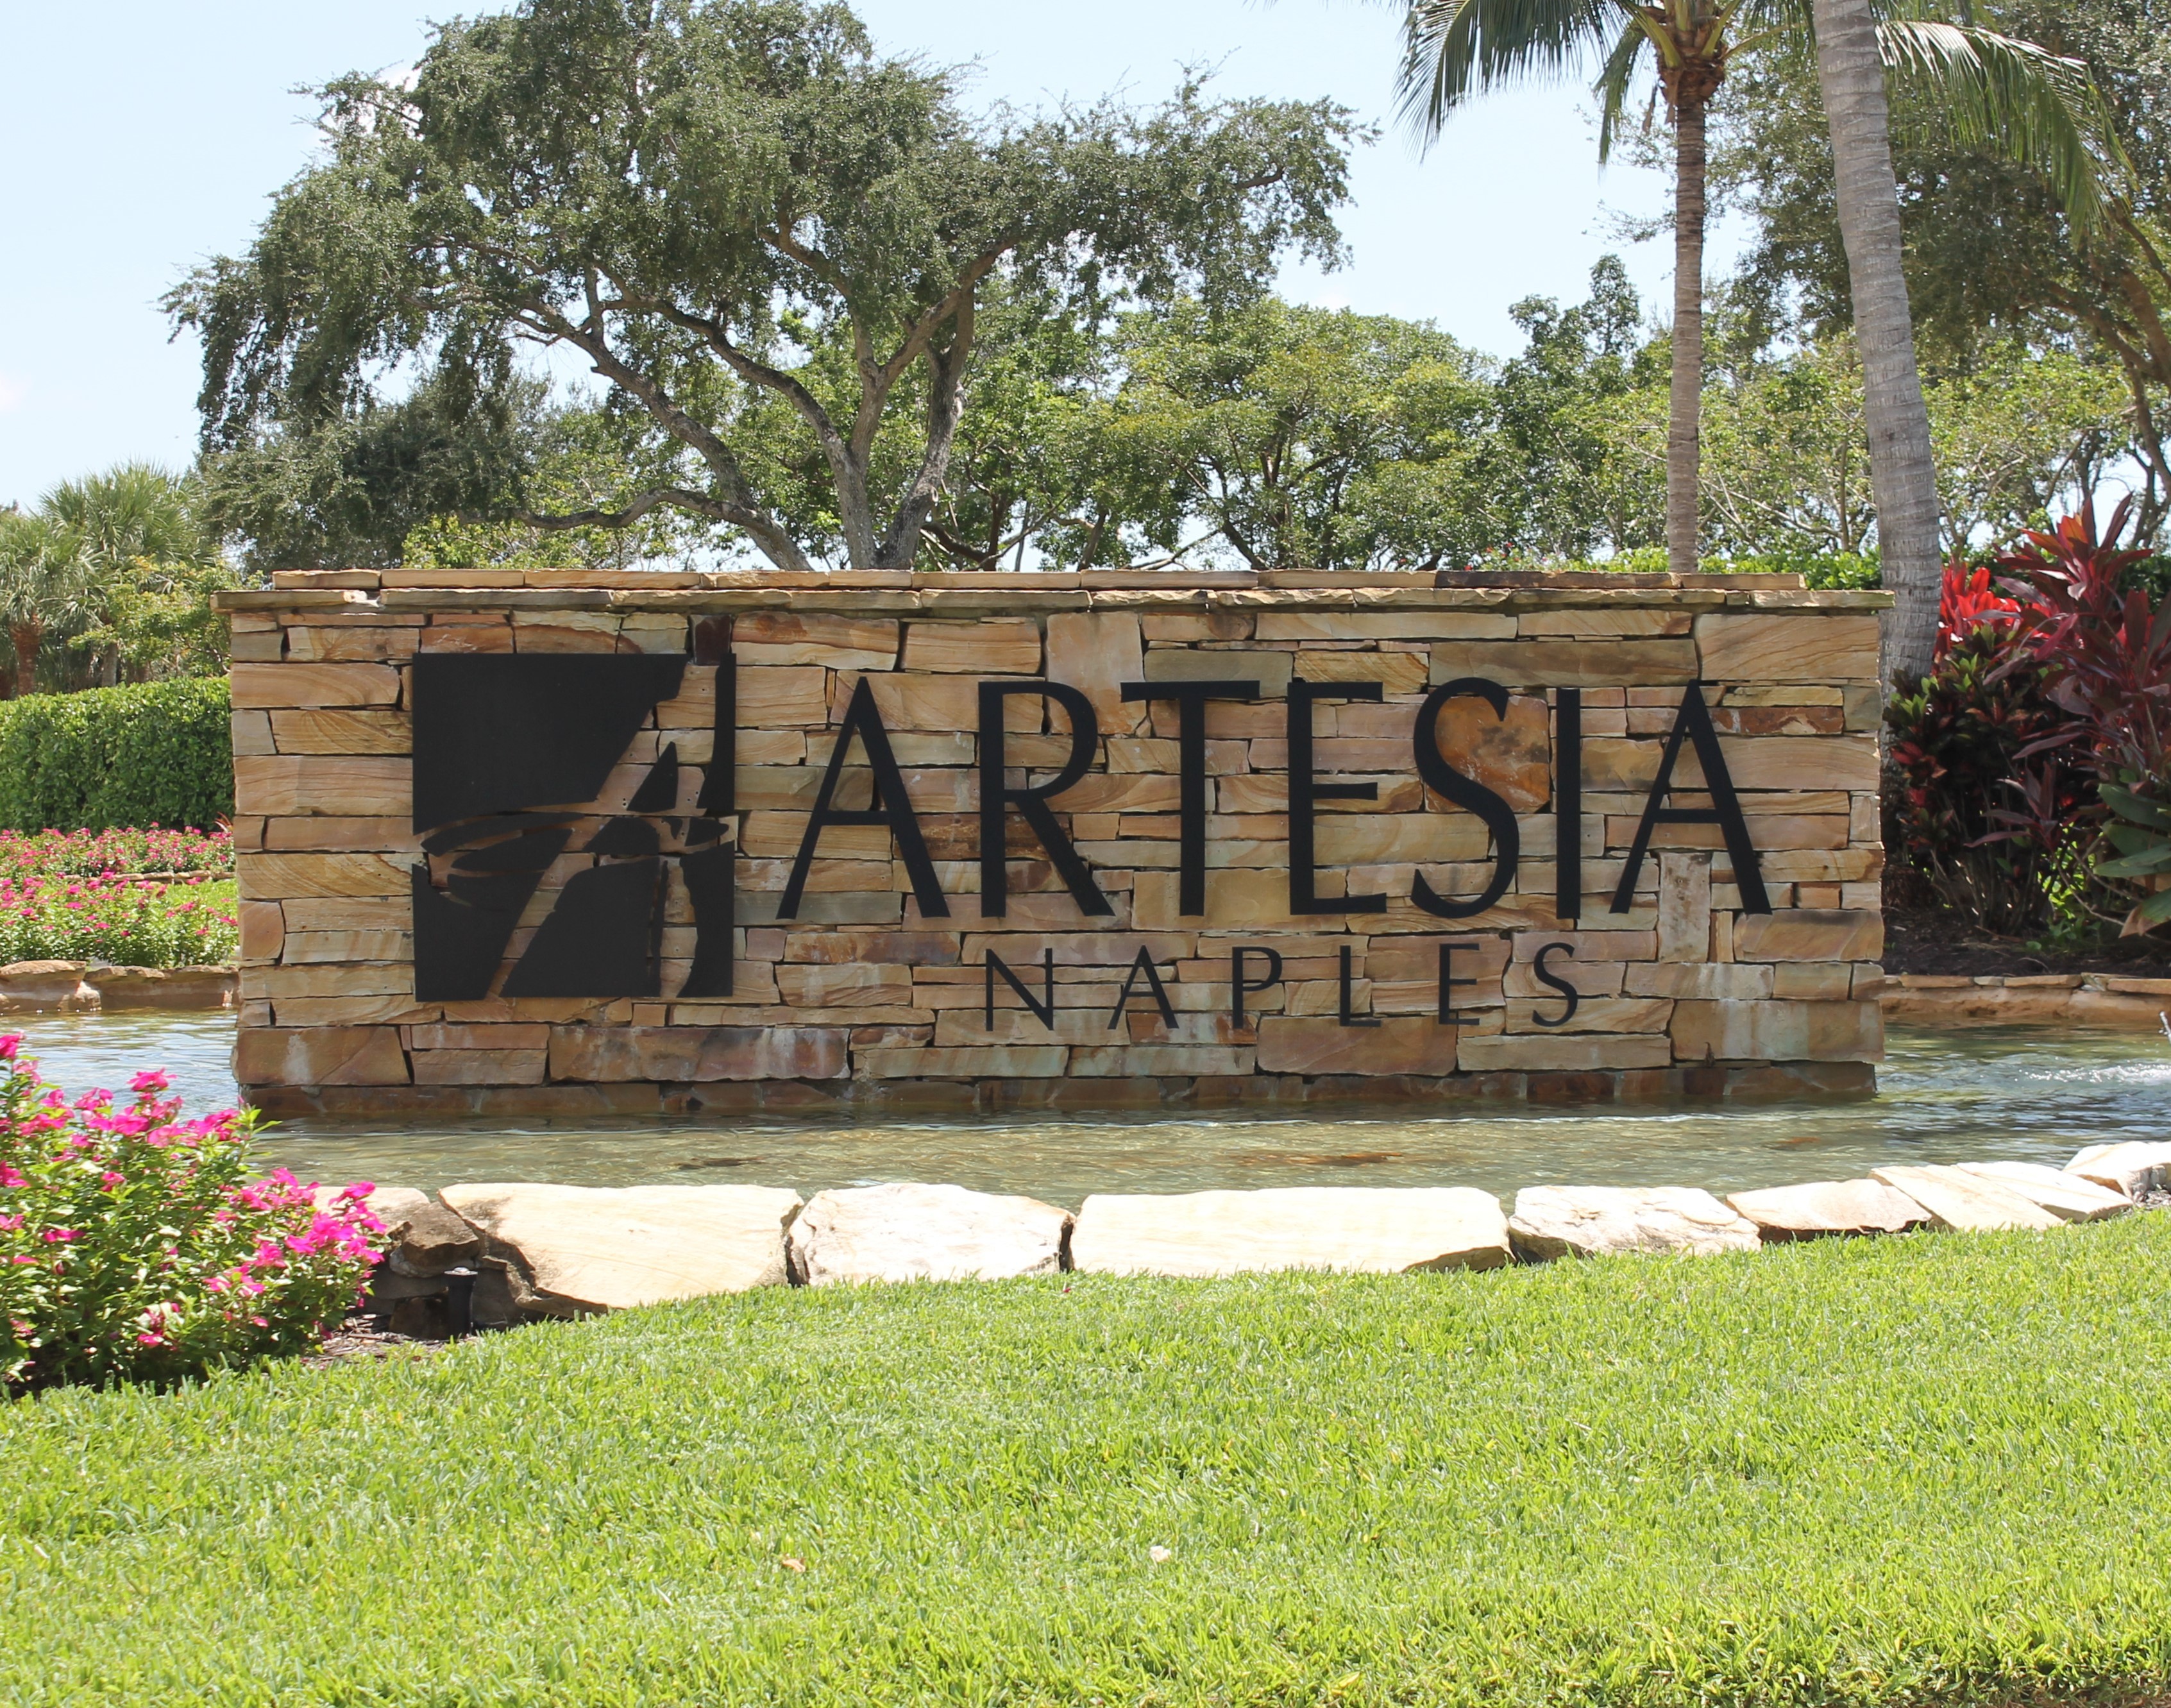 Artesia homes for sale and luxury real estate for sale in Artesia, a Marco Island community and luxury neighborhood in Marco Island Florida.